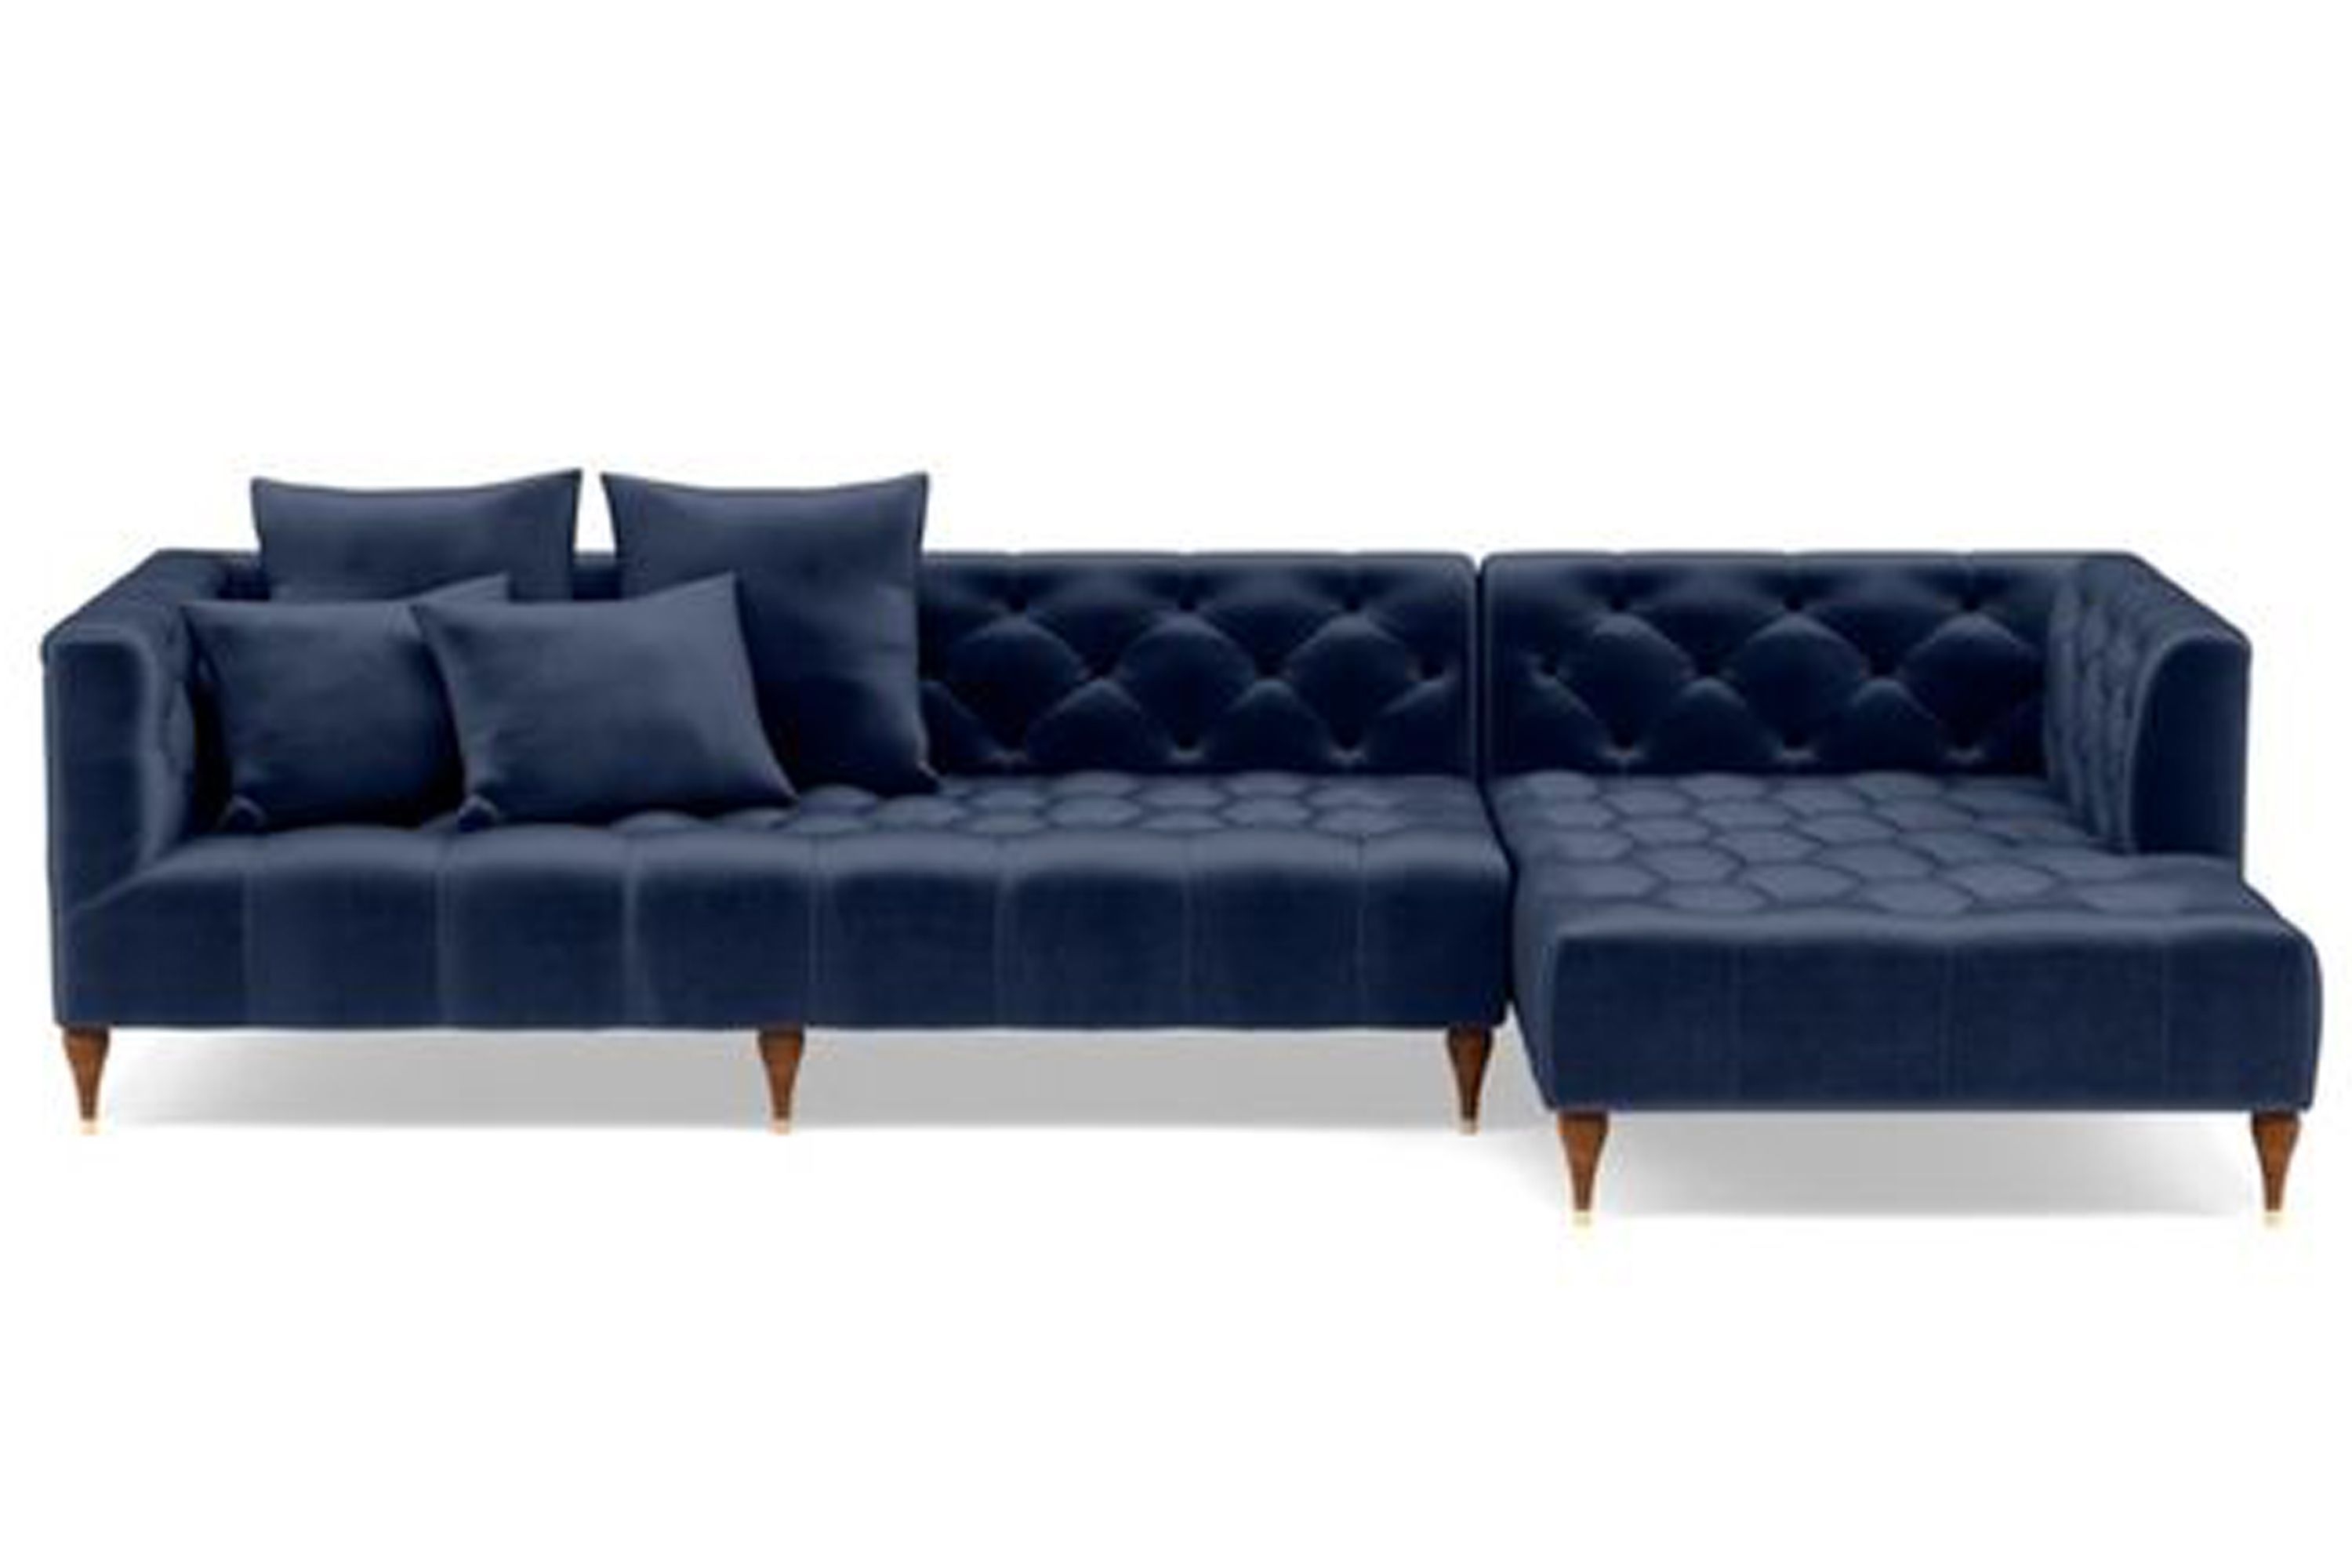 Custom Ms. Chesterfield Sectional Sofa with Right Chaise  Oiled Walnut with Brass Cap Stiletto Legs - 114", DECIDE LATER FABRIC - Image 0